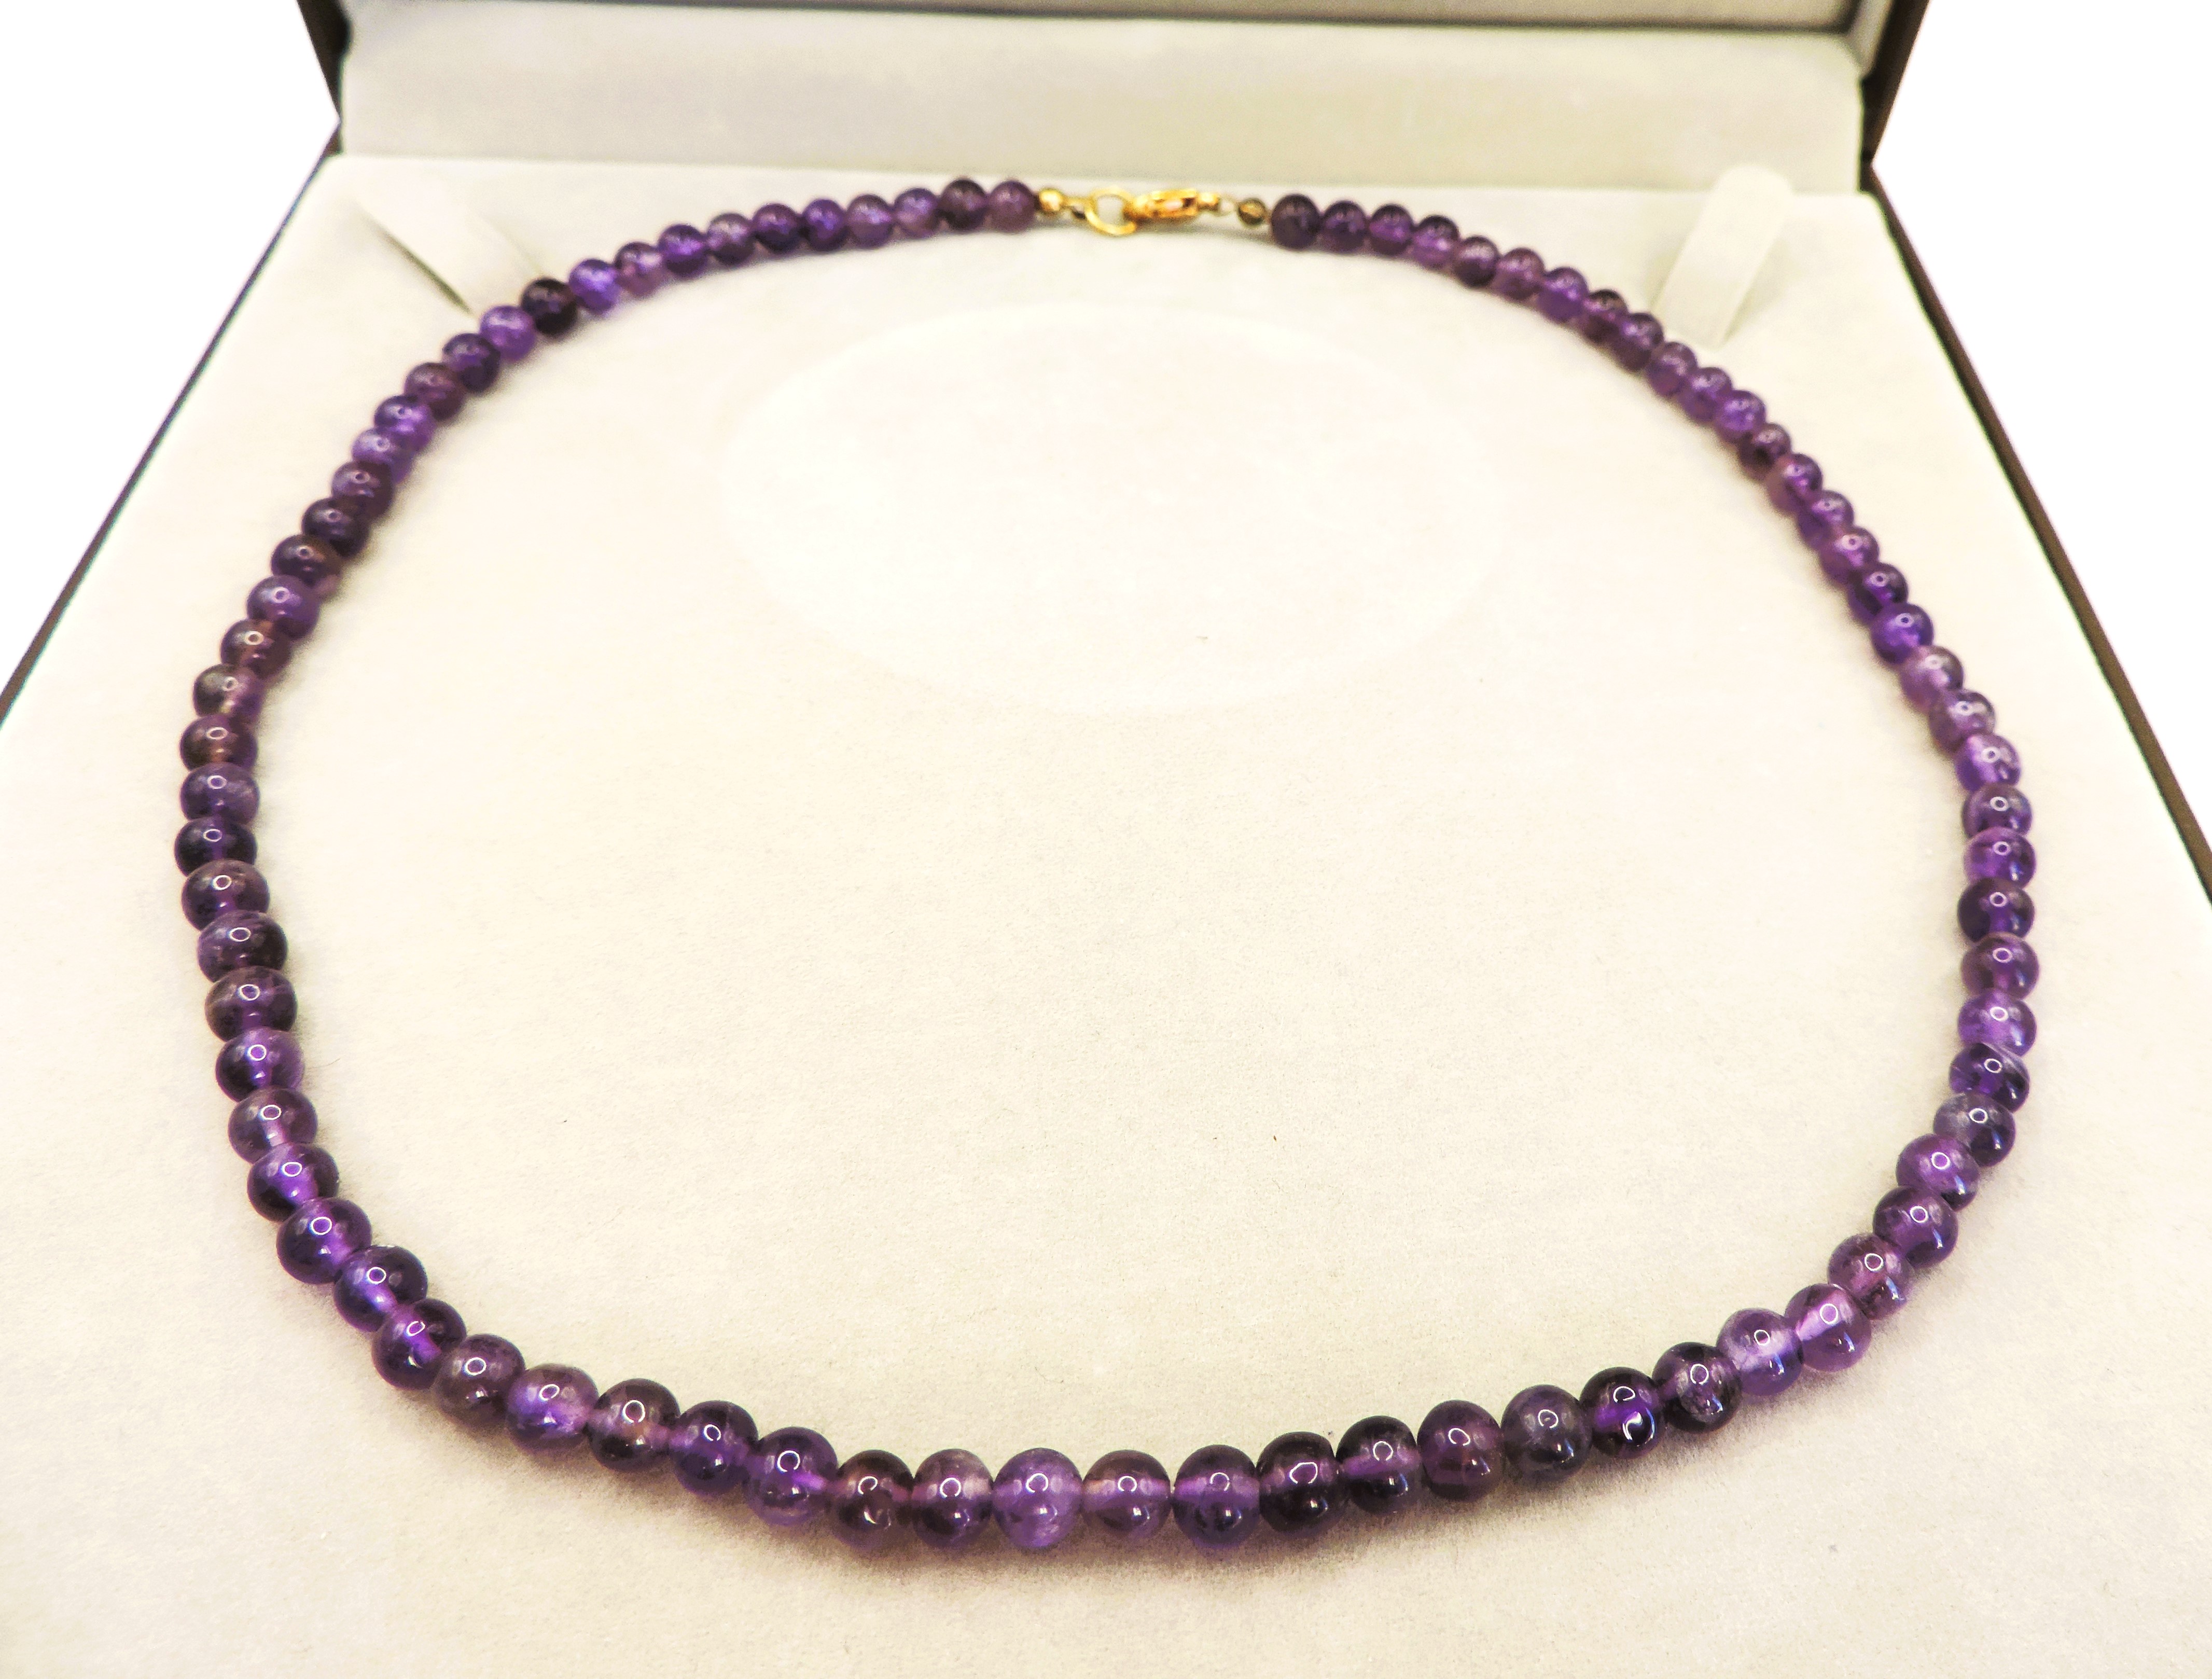 18 inch Amethyst Bead Necklace With Gift Box - Image 3 of 3